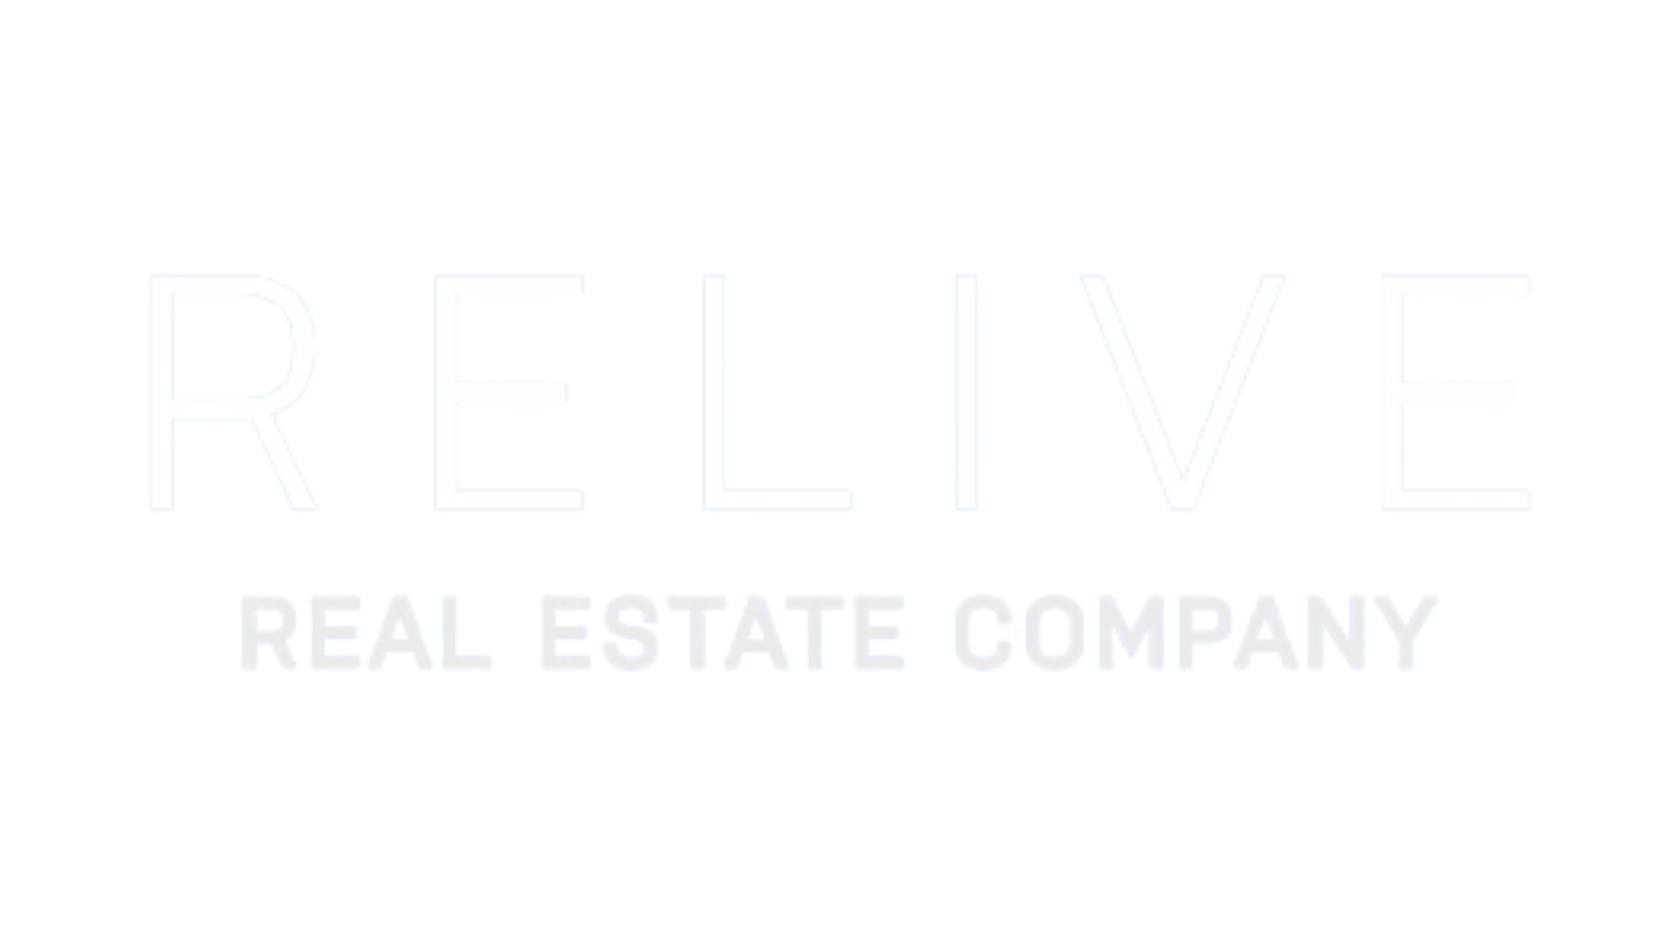 RELIVE REAL ESTATE COMPANY WATERMARK LOGO